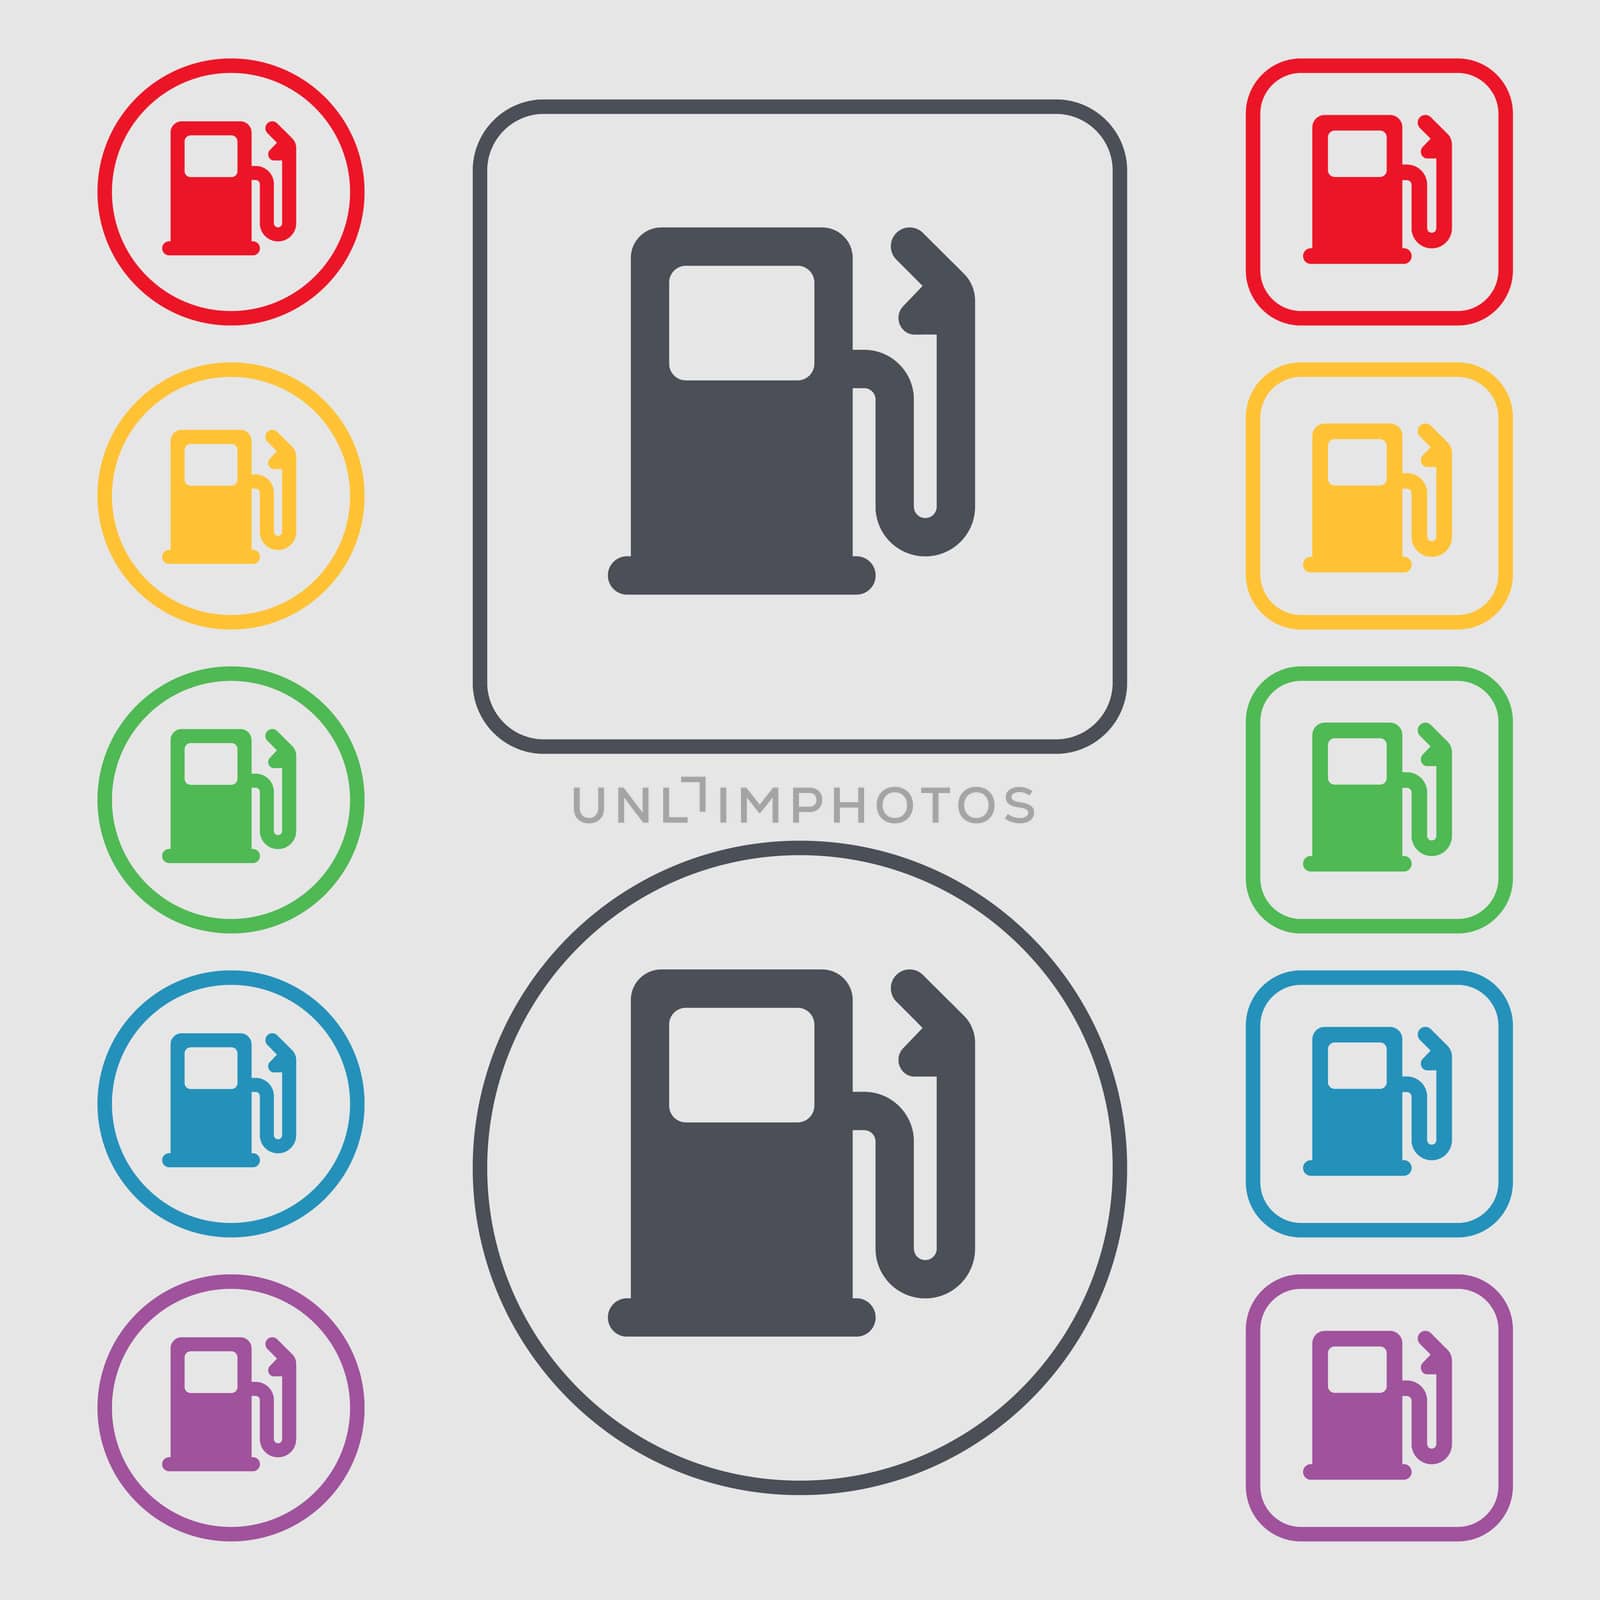 Petrol or Gas station, Car fuel icon sign. symbol on the Round and square buttons with frame. illustration